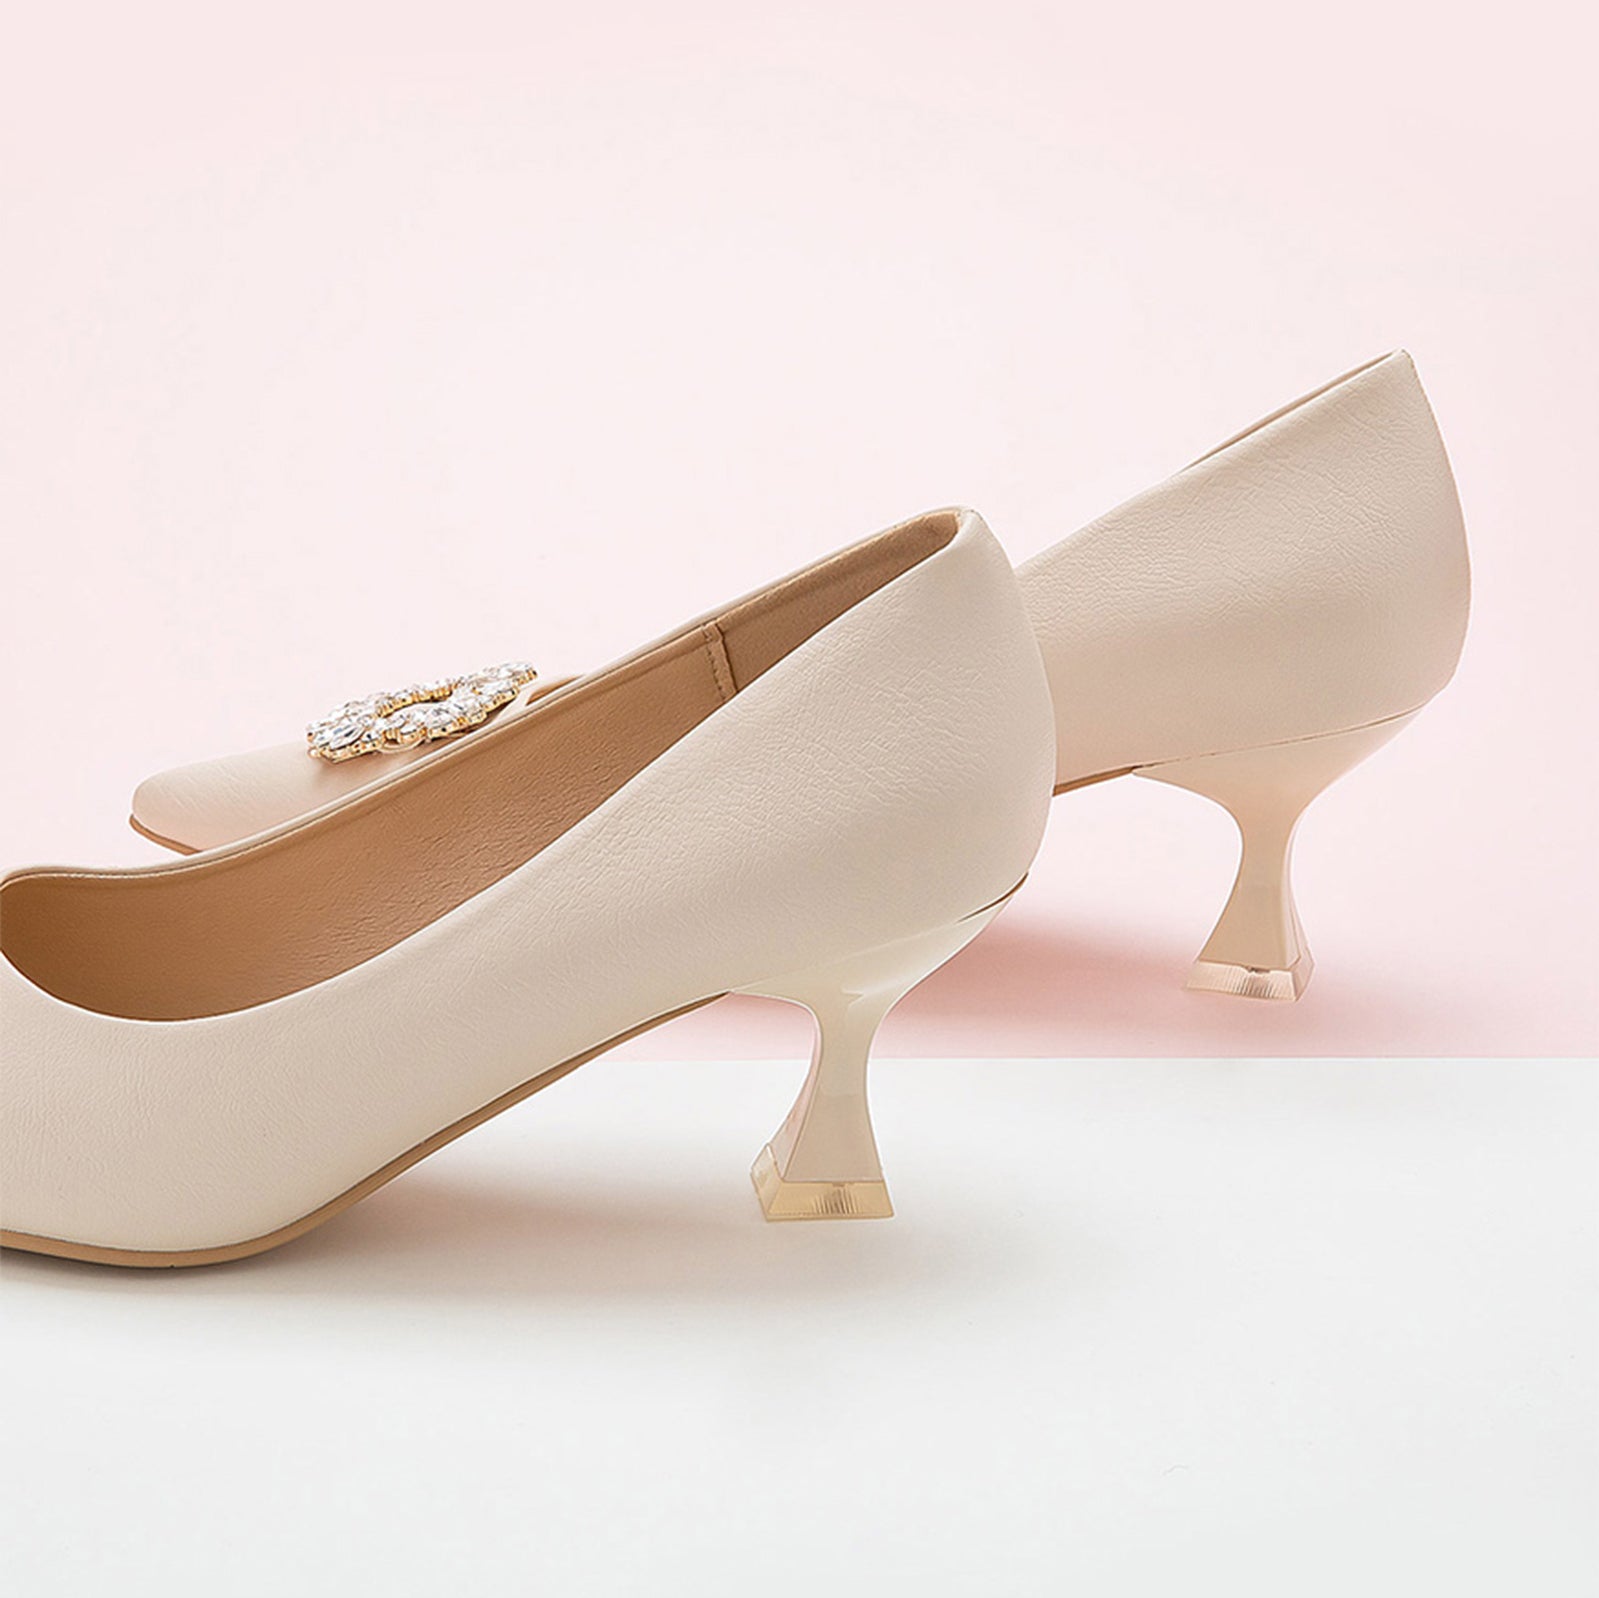  White Embellished Kitten Heel Pumps featuring a decorative buckle, a chic and modern choice for everyday wear